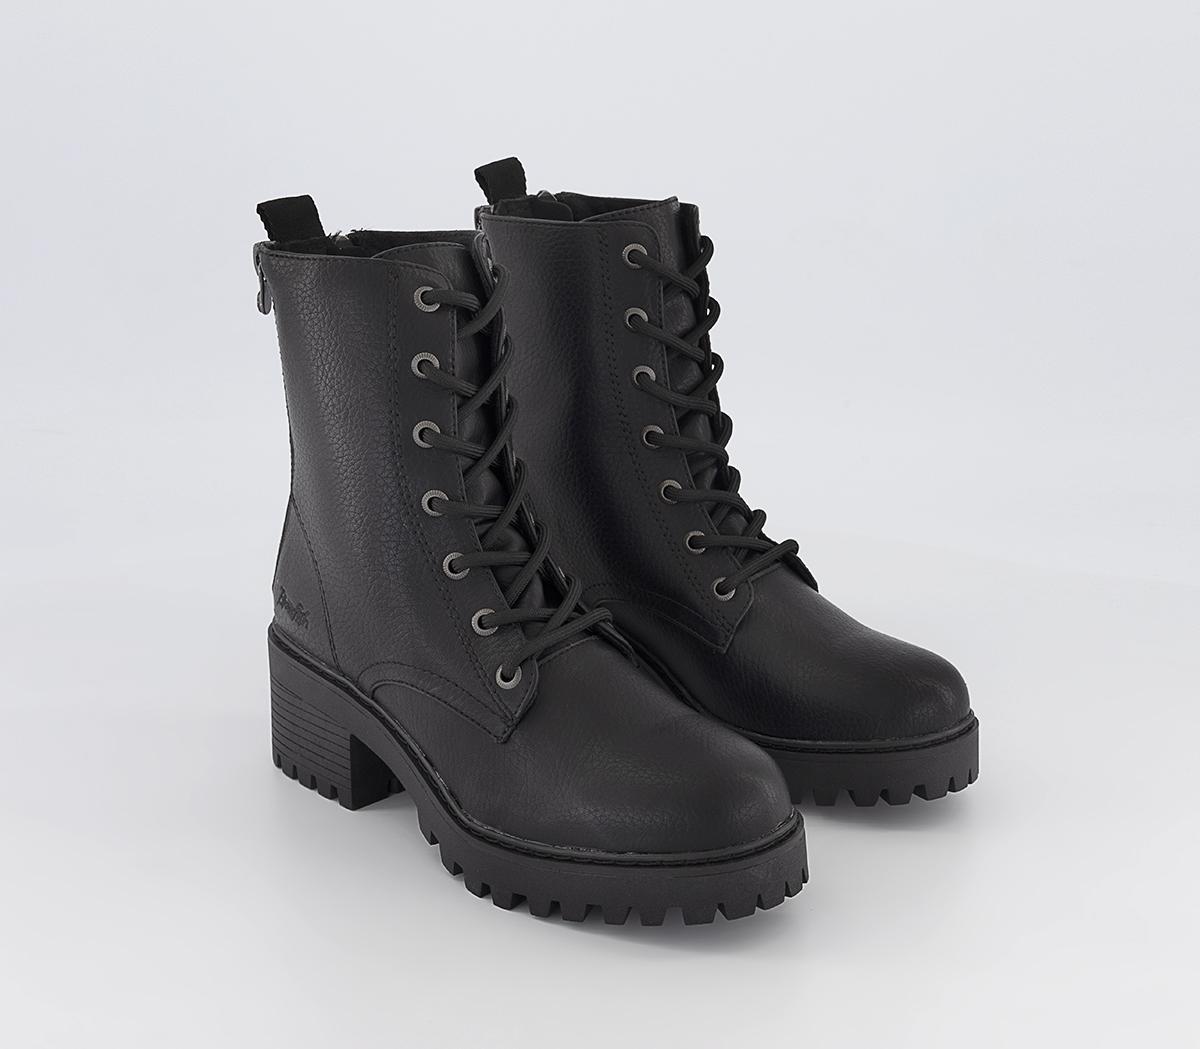 Blowfish Malibu Leith Lace Up Boots Black - Women's Ankle Boots